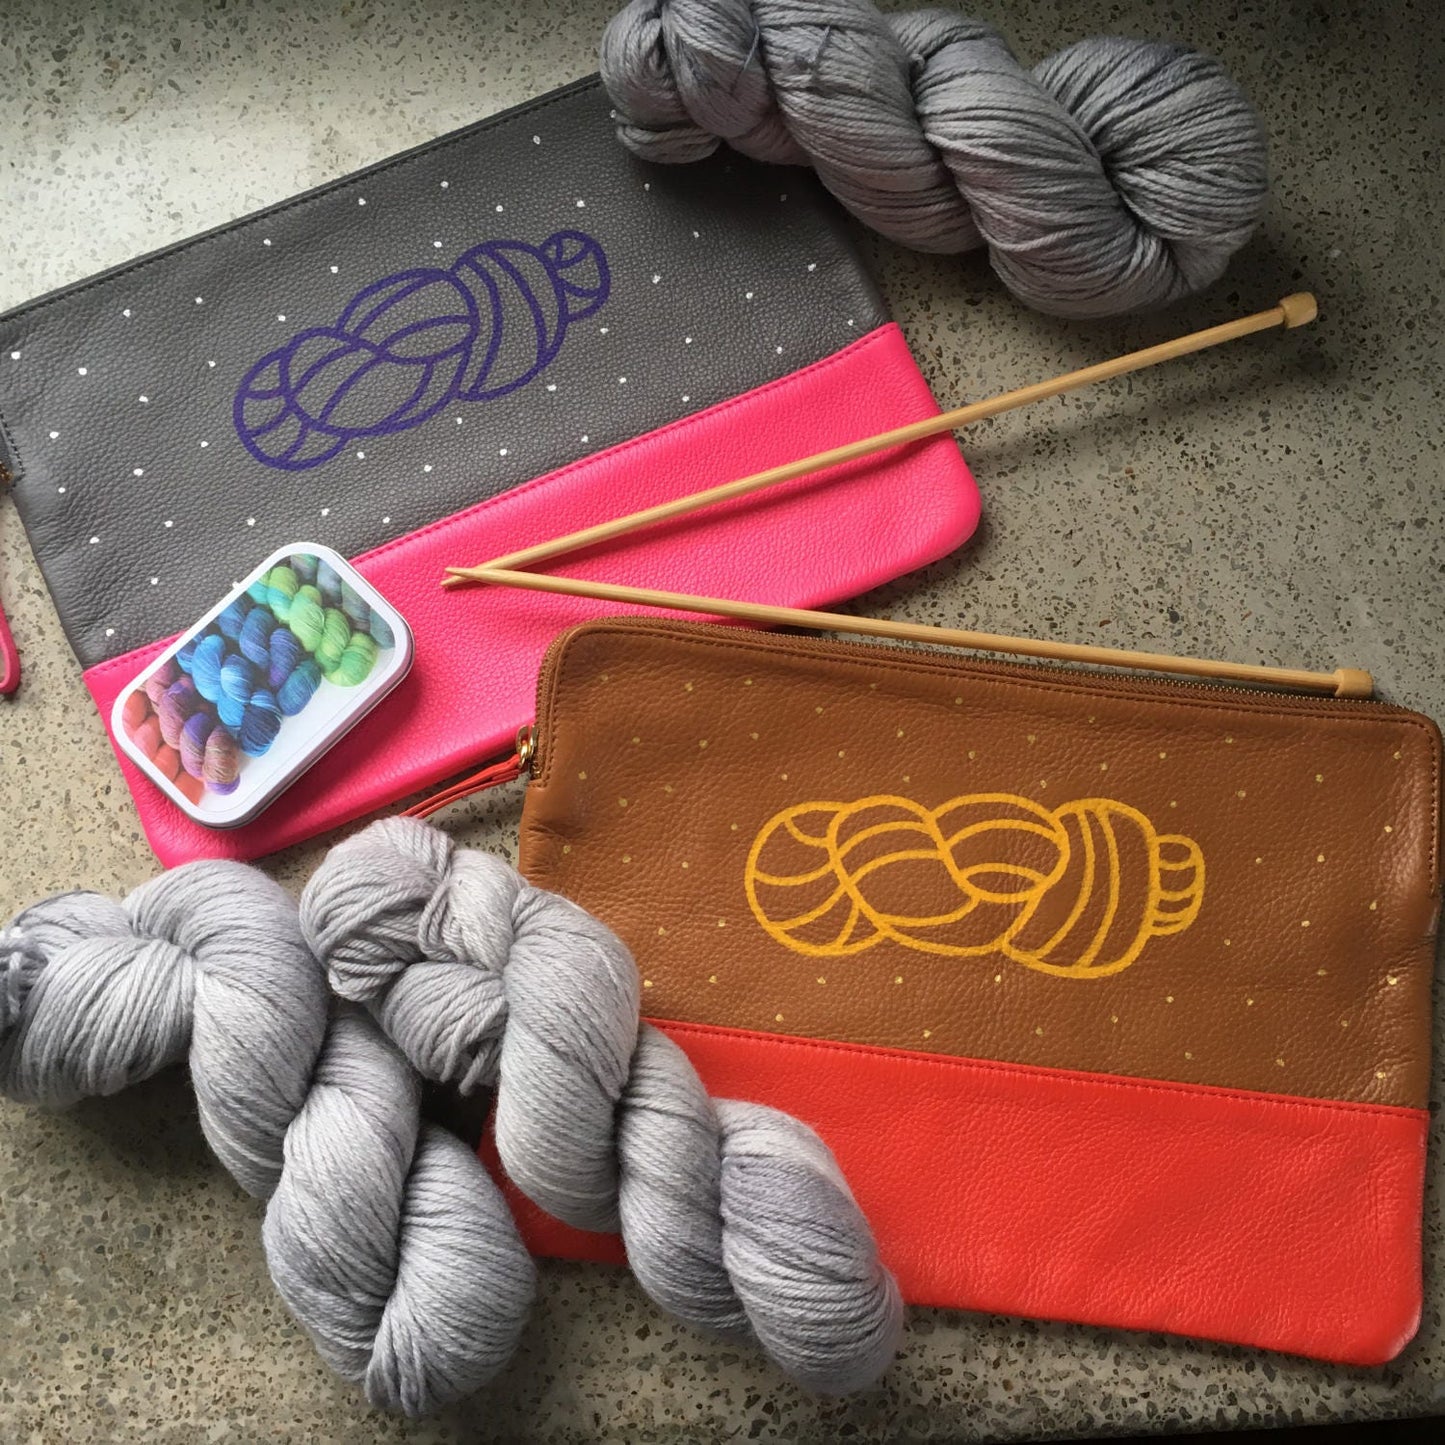 Handpainted Leather Pouch - Keep Calm and Carry Yarn